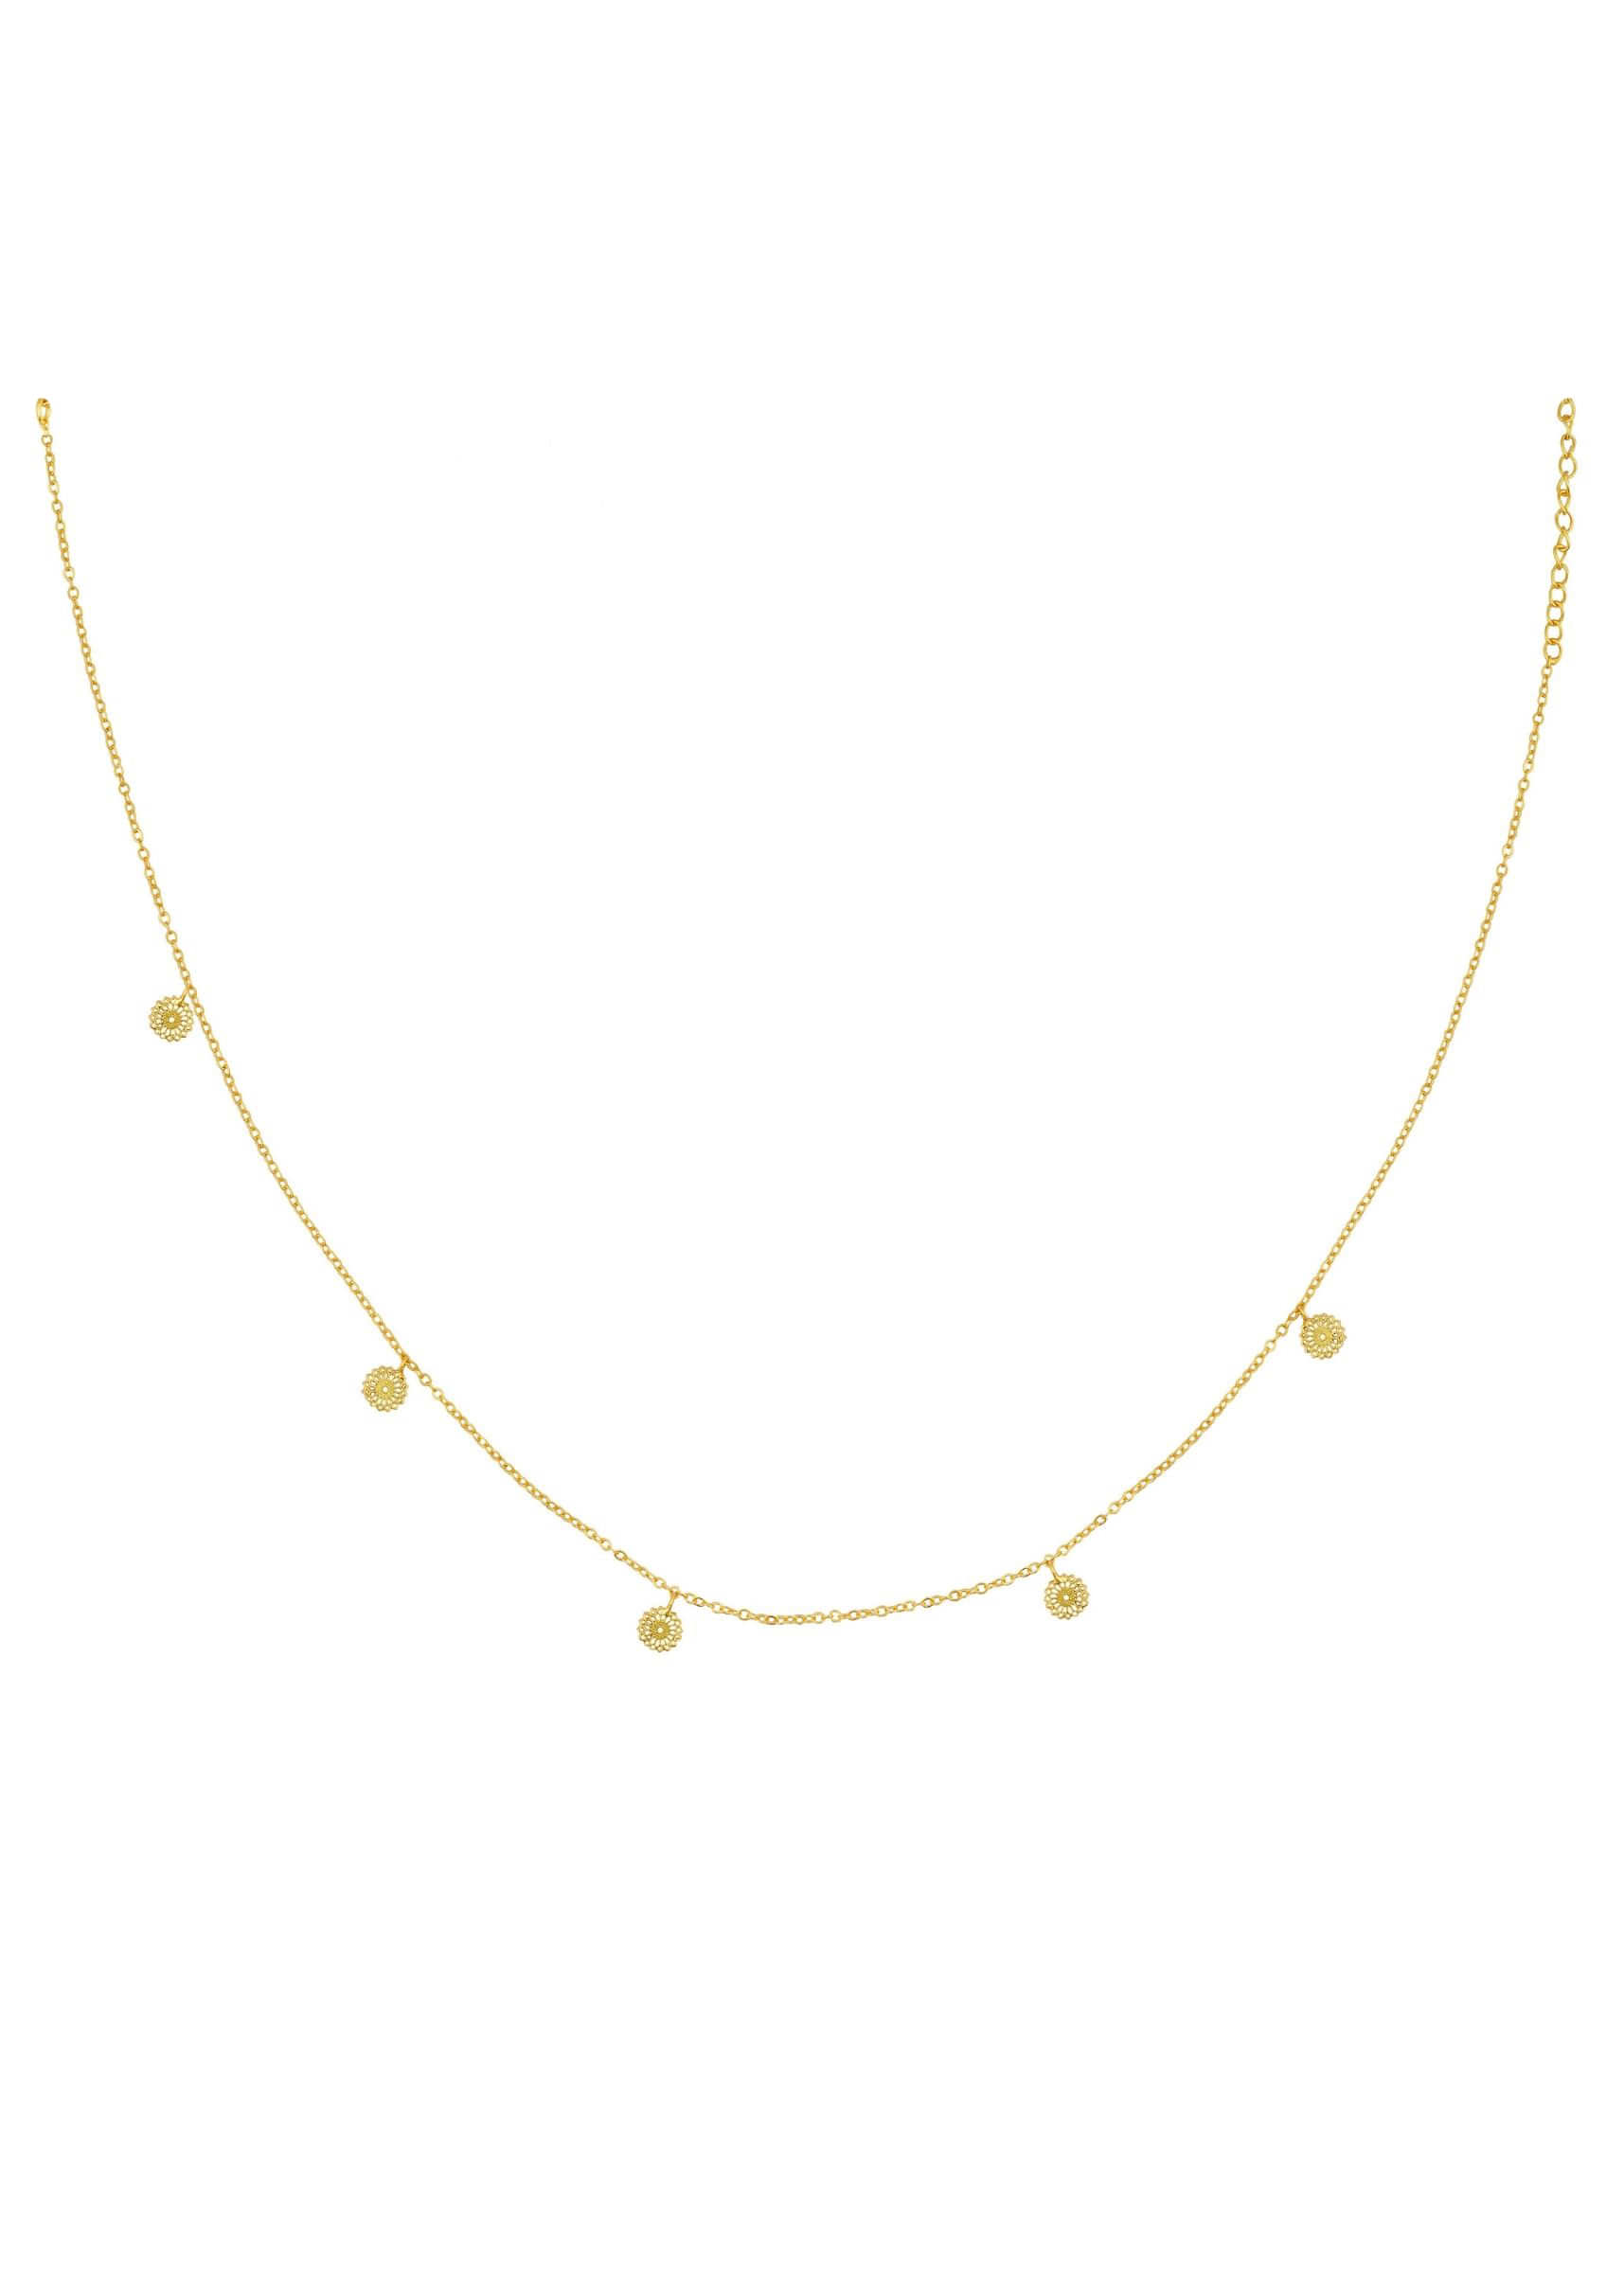 22Kt Gold Plated Charming Pendant Necklace